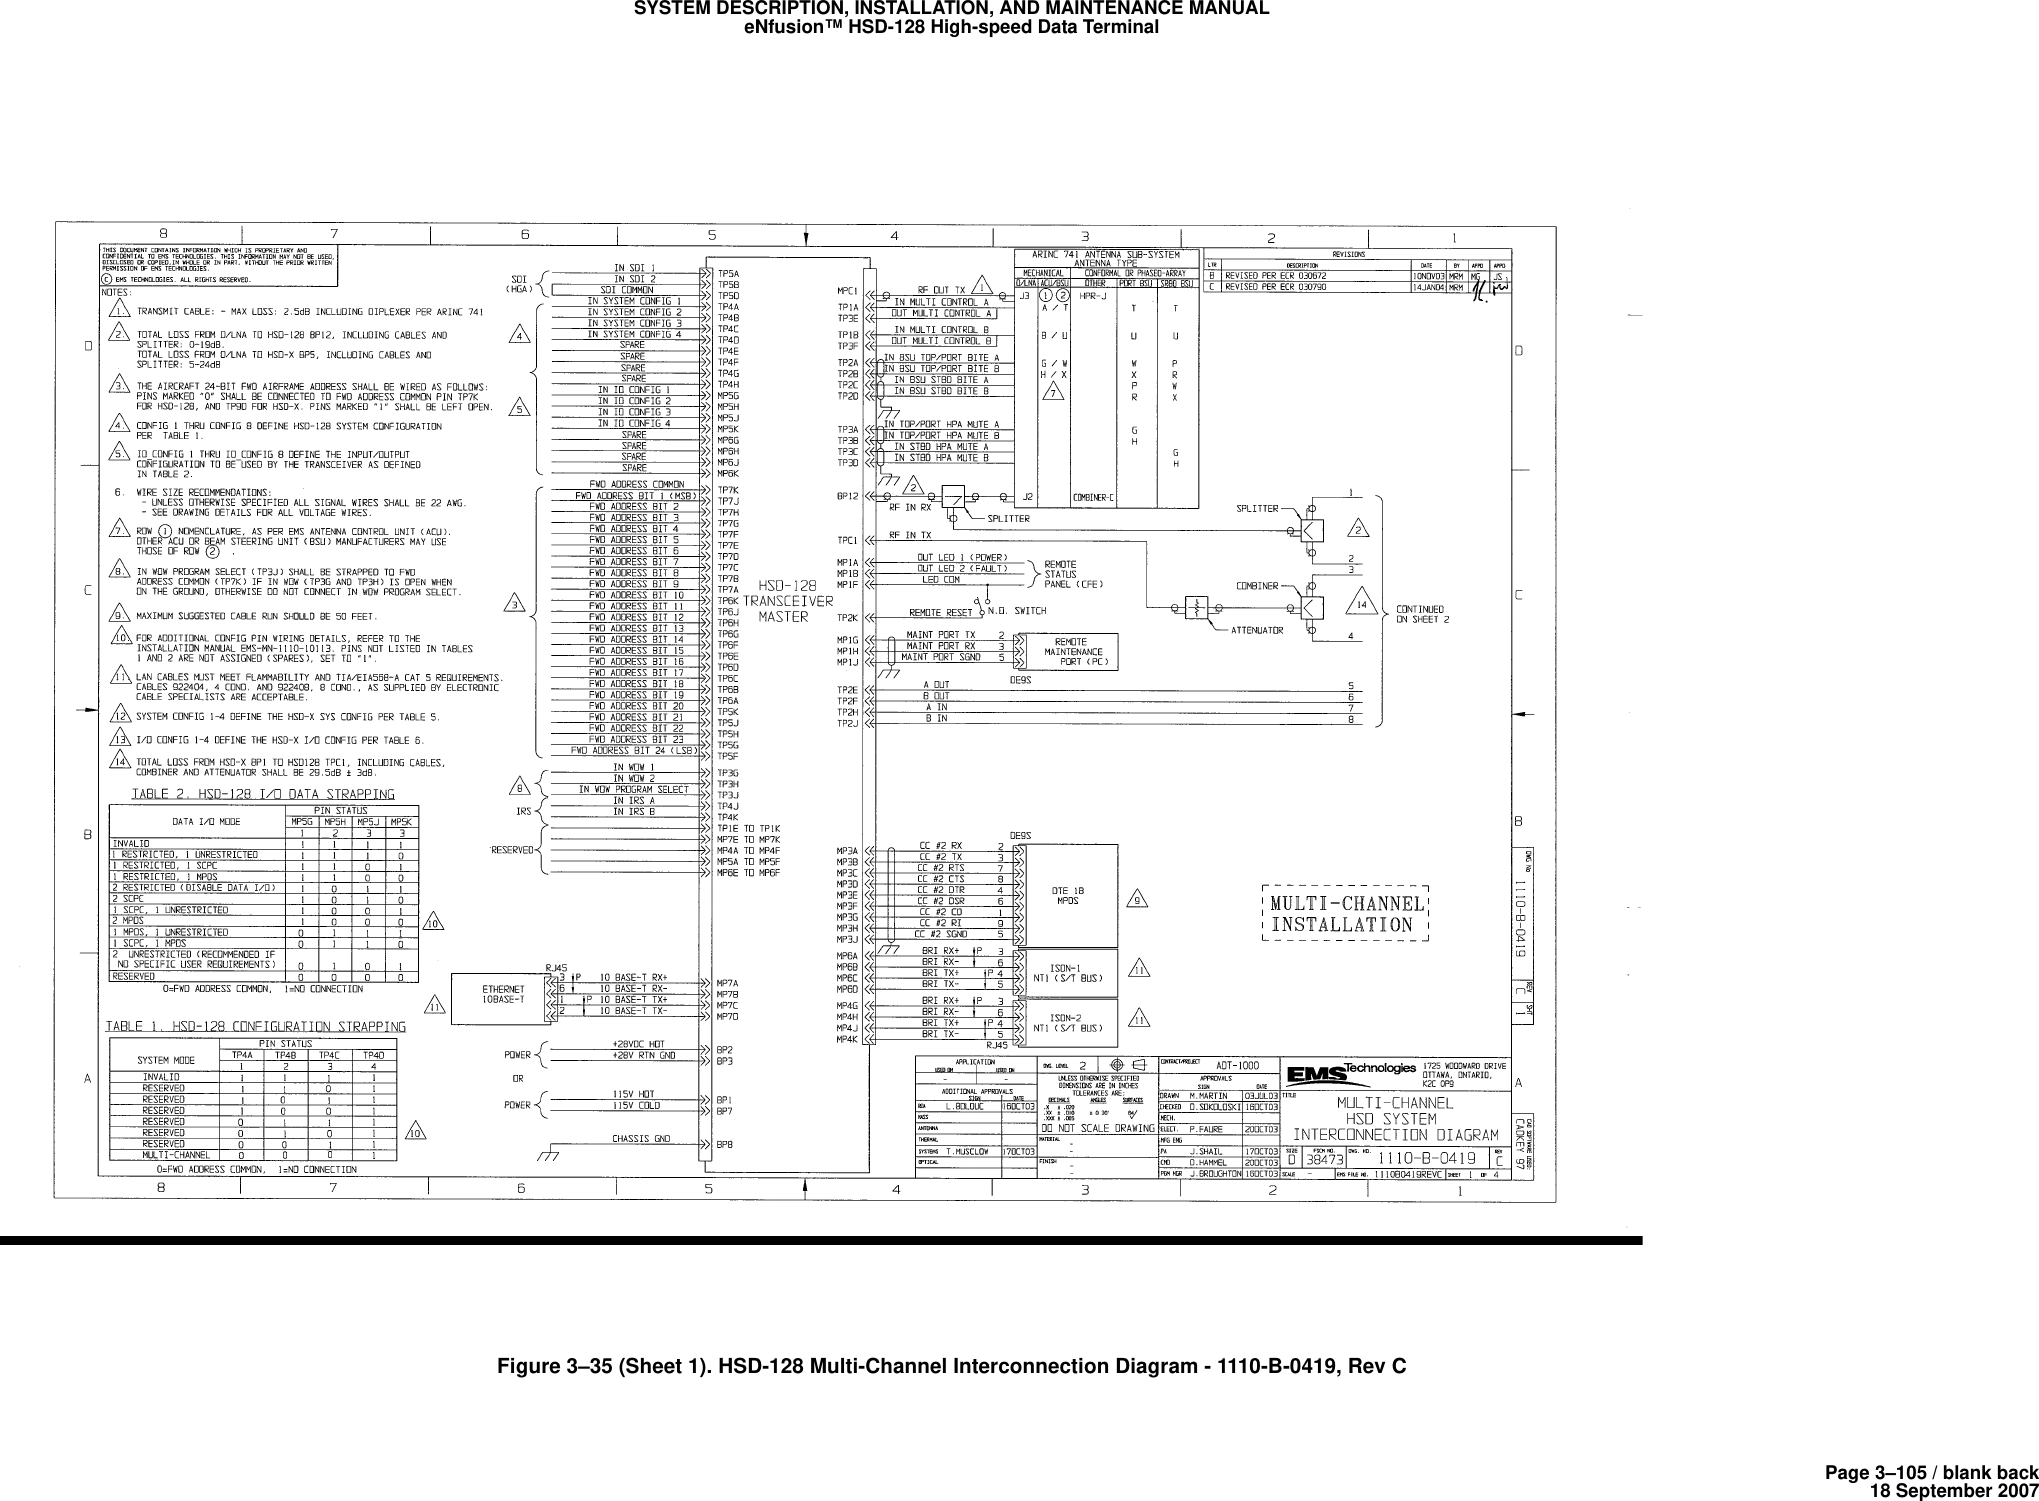 Page 3–105 / blank back18 September 2007SYSTEM DESCRIPTION, INSTALLATION, AND MAINTENANCE MANUALeNfusion™ HSD-128 High-speed Data TerminalFigure 3–35 (Sheet 1). HSD-128 Multi-Channel Interconnection Diagram - 1110-B-0419, Rev C